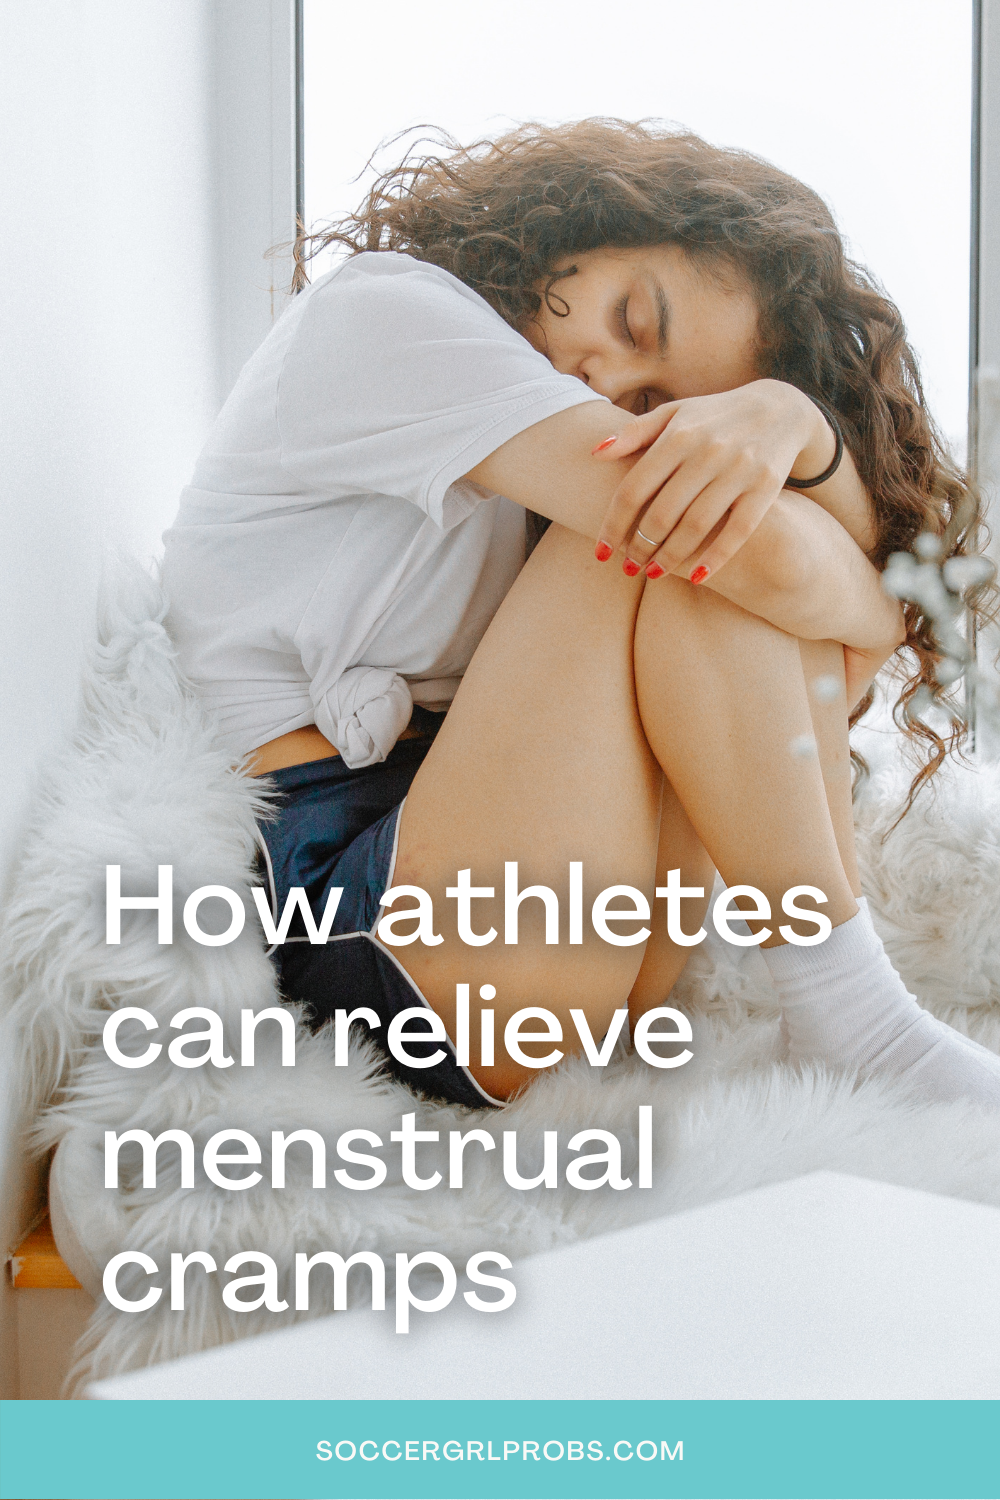 How Athletes Can Relieve Menstrual Cramps